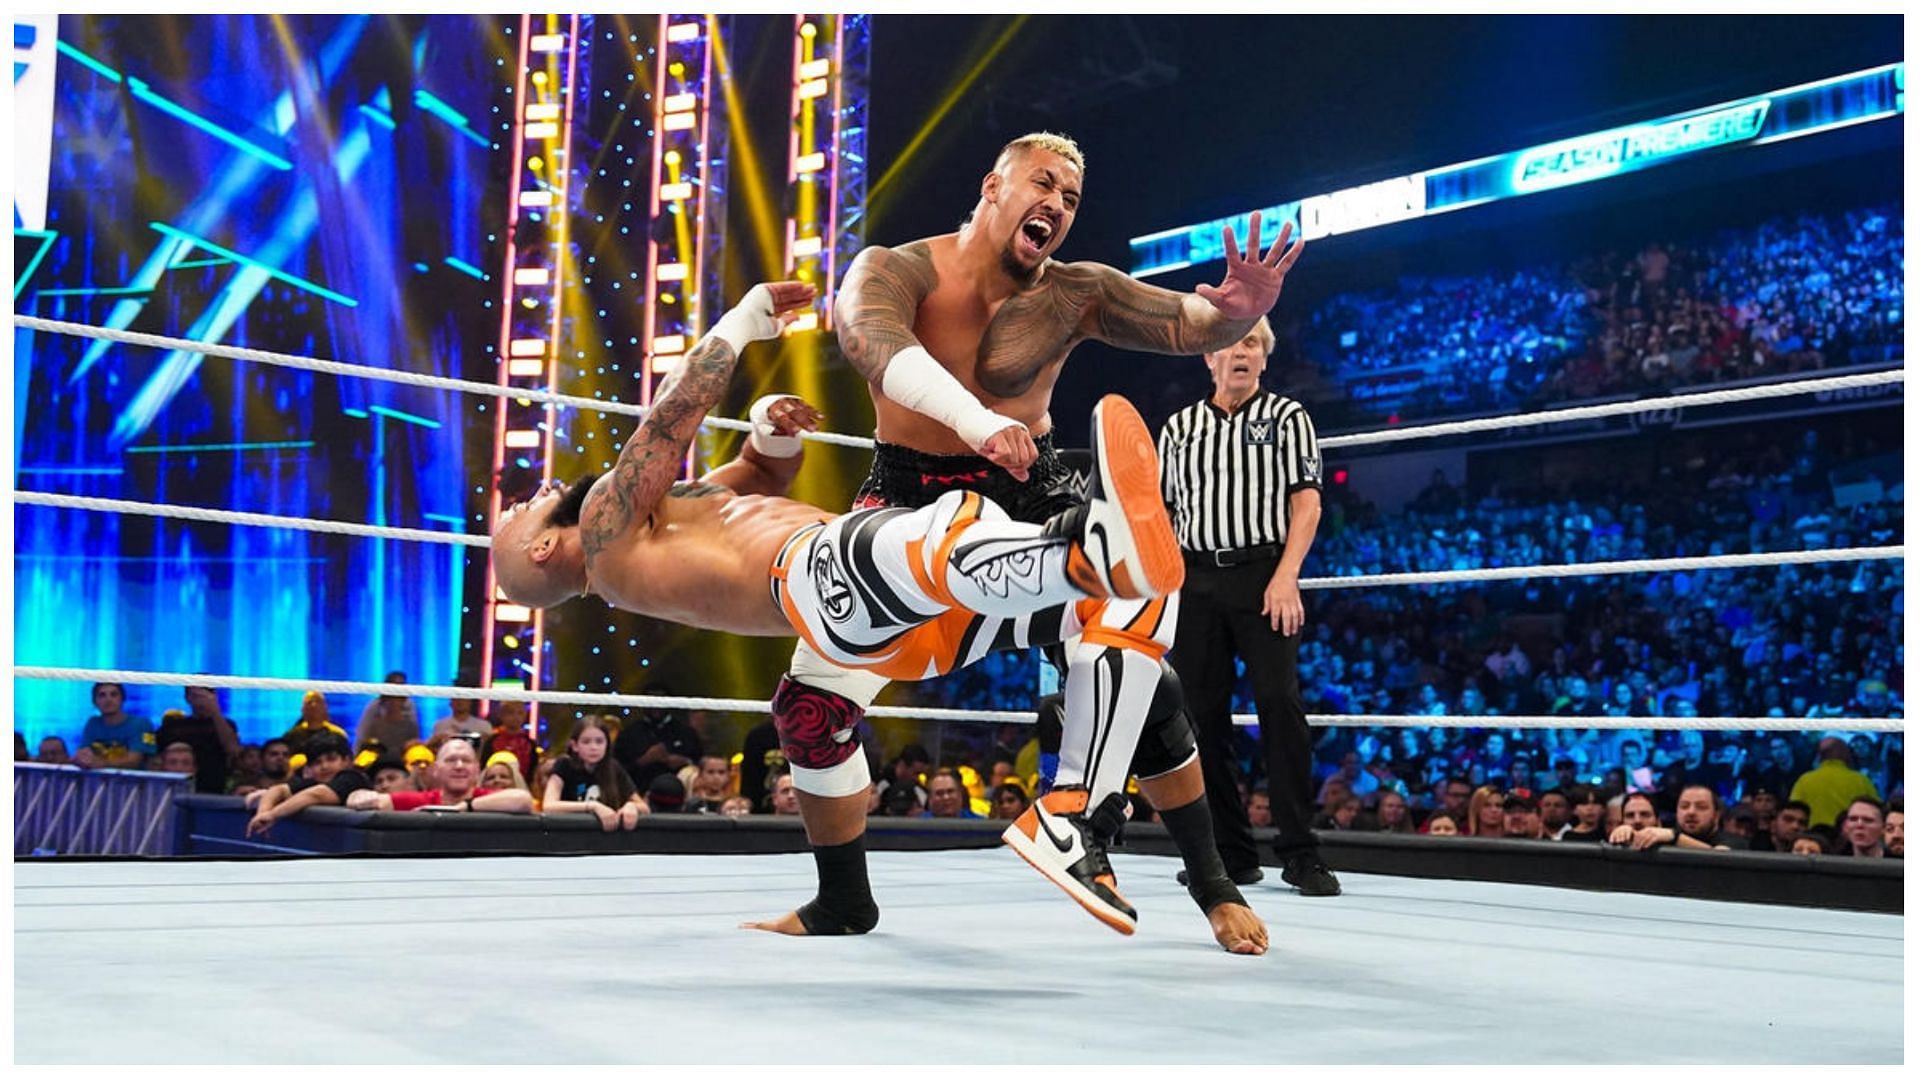 Solo Sikoa in action on WWE SmackDown